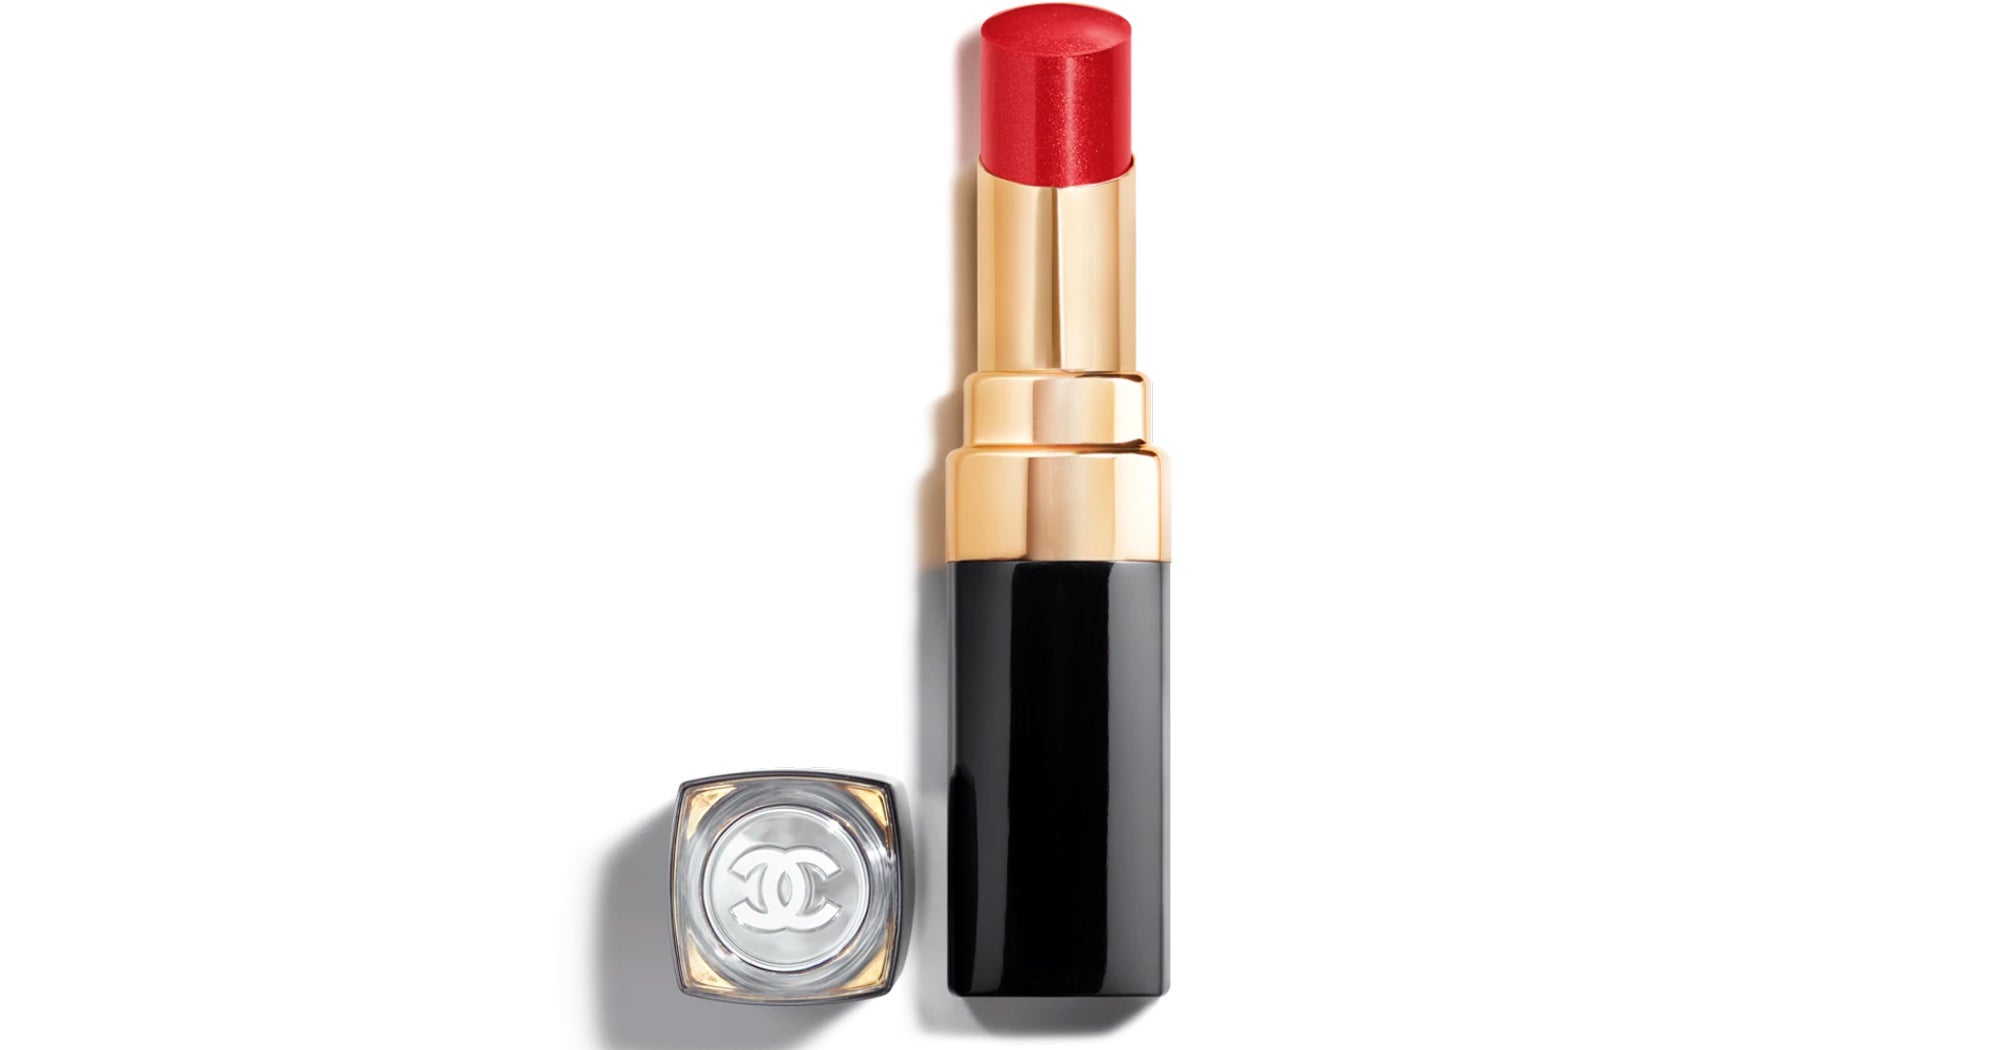 Best Chanel Makeup Fragrance That's Worth It 2023